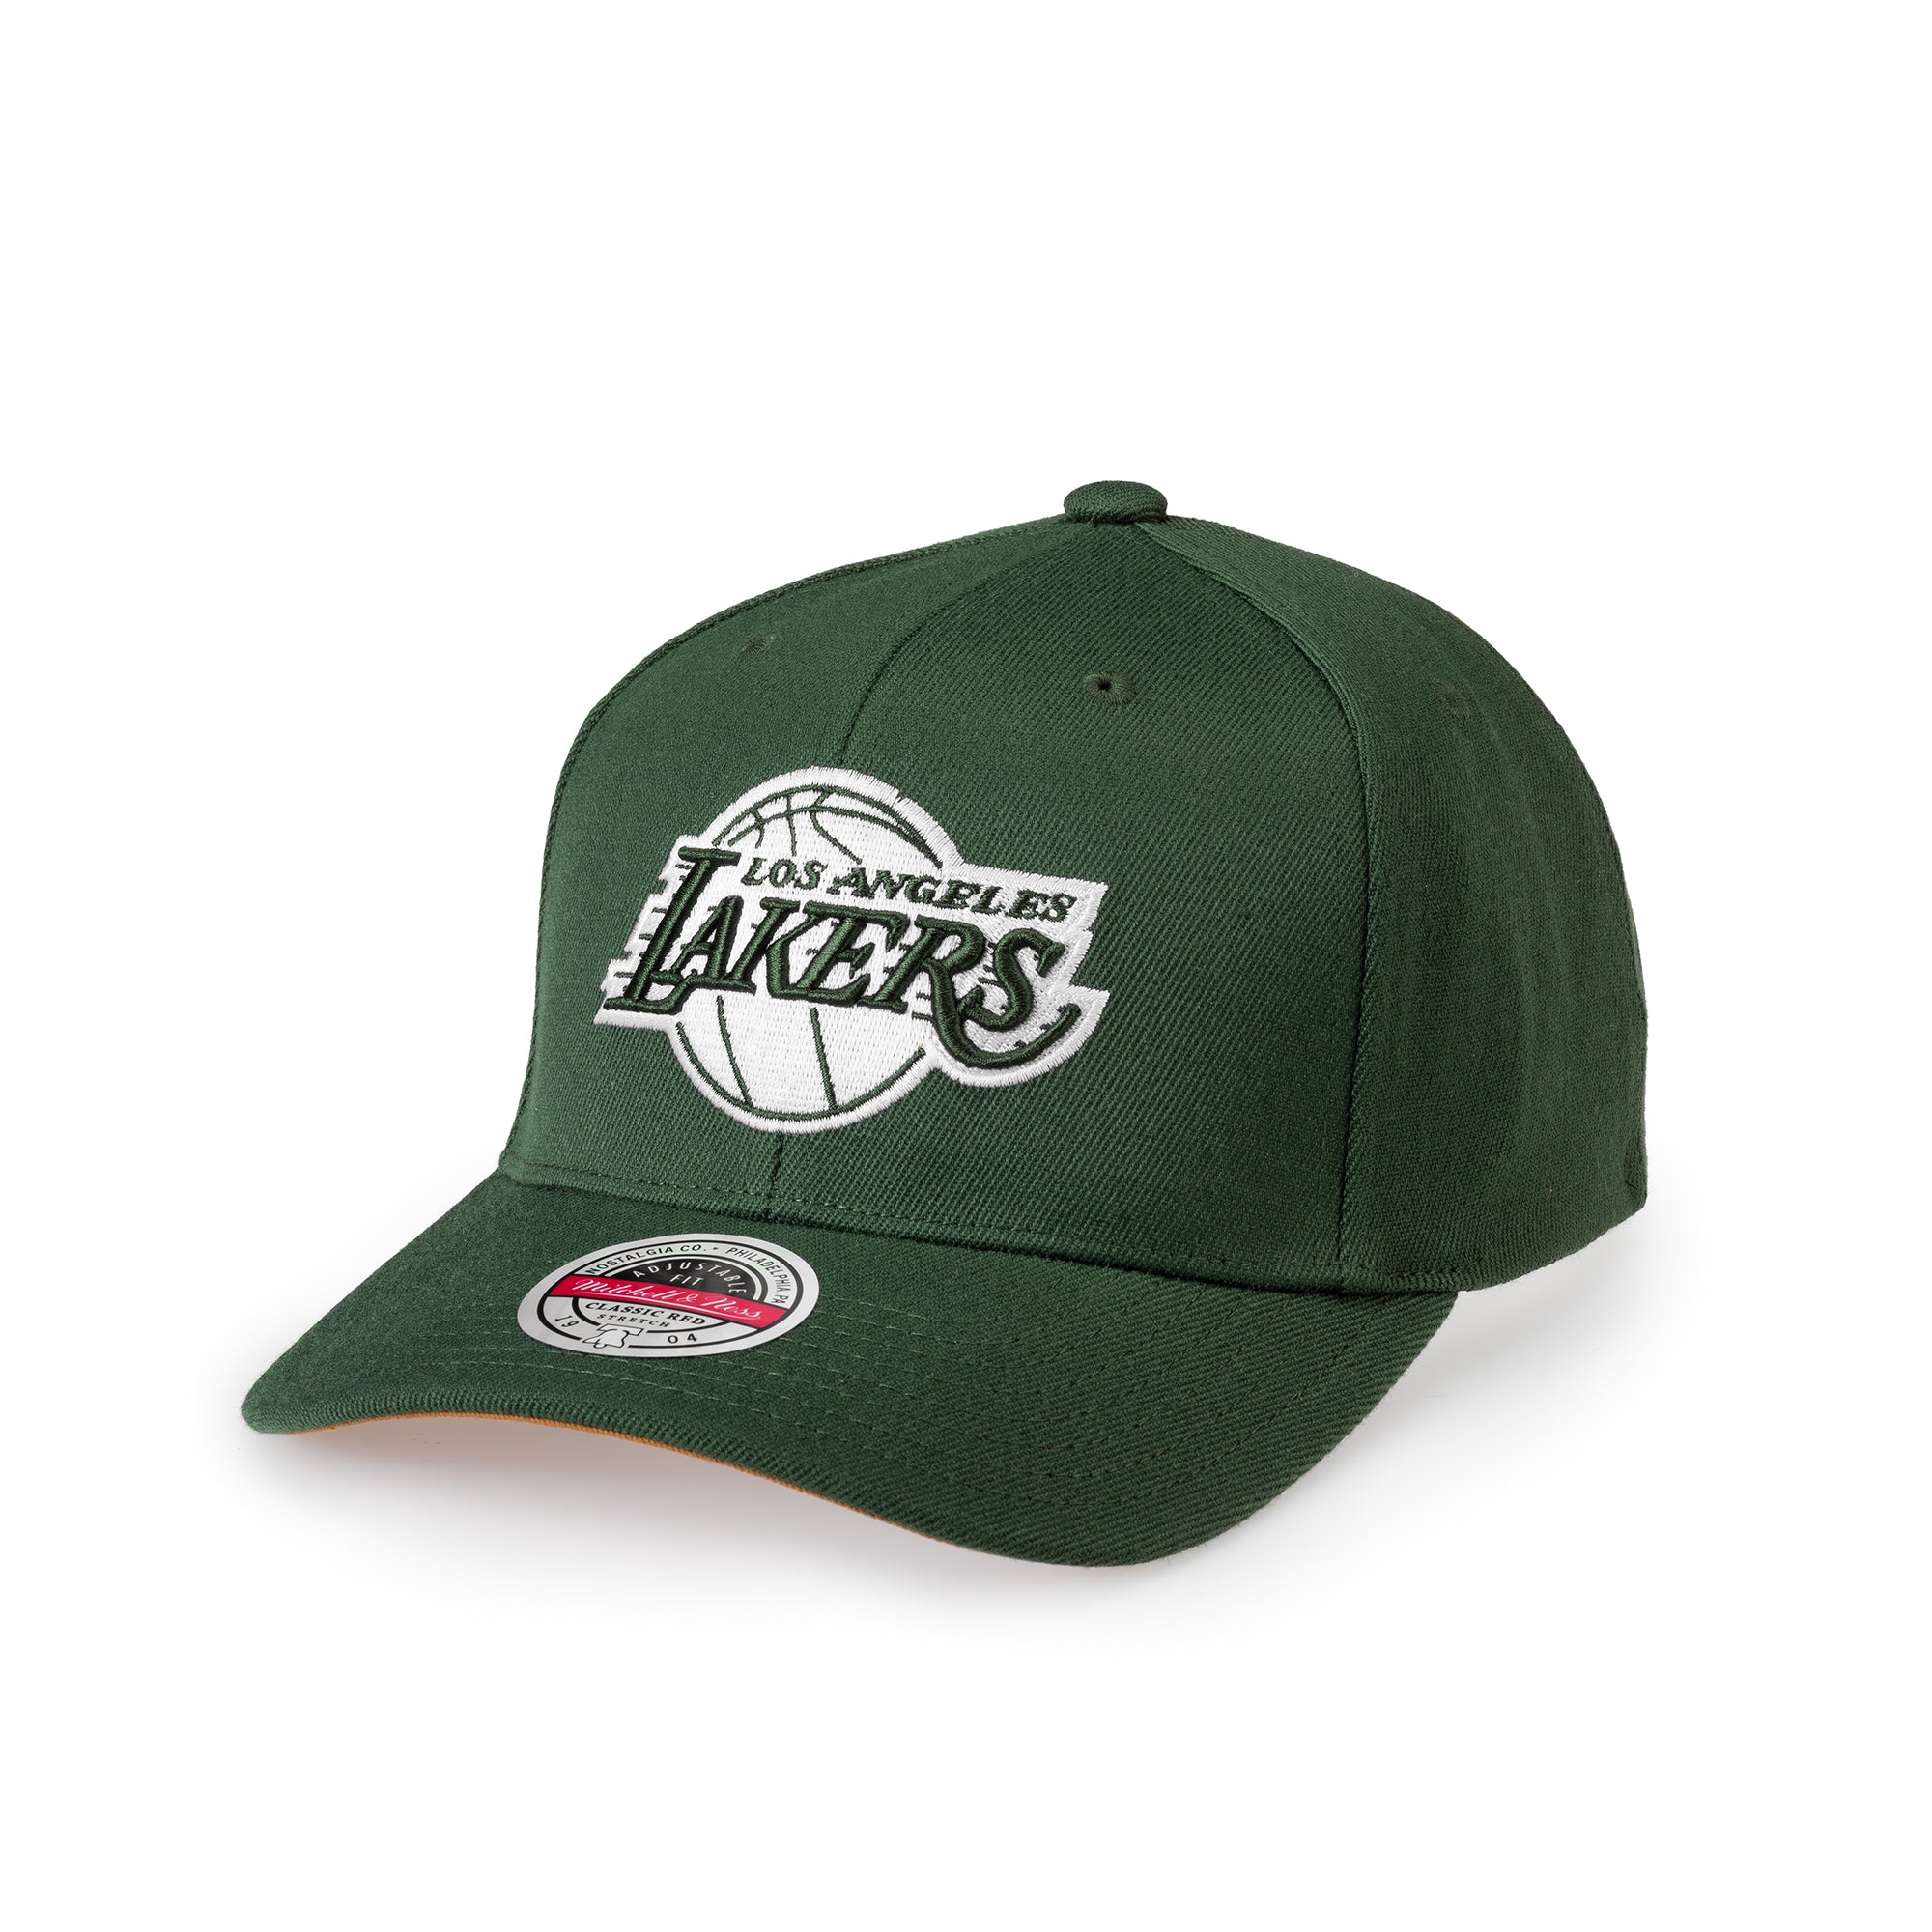 Green/Sand Classic Red - Los Angeles Lakers Green/Sand